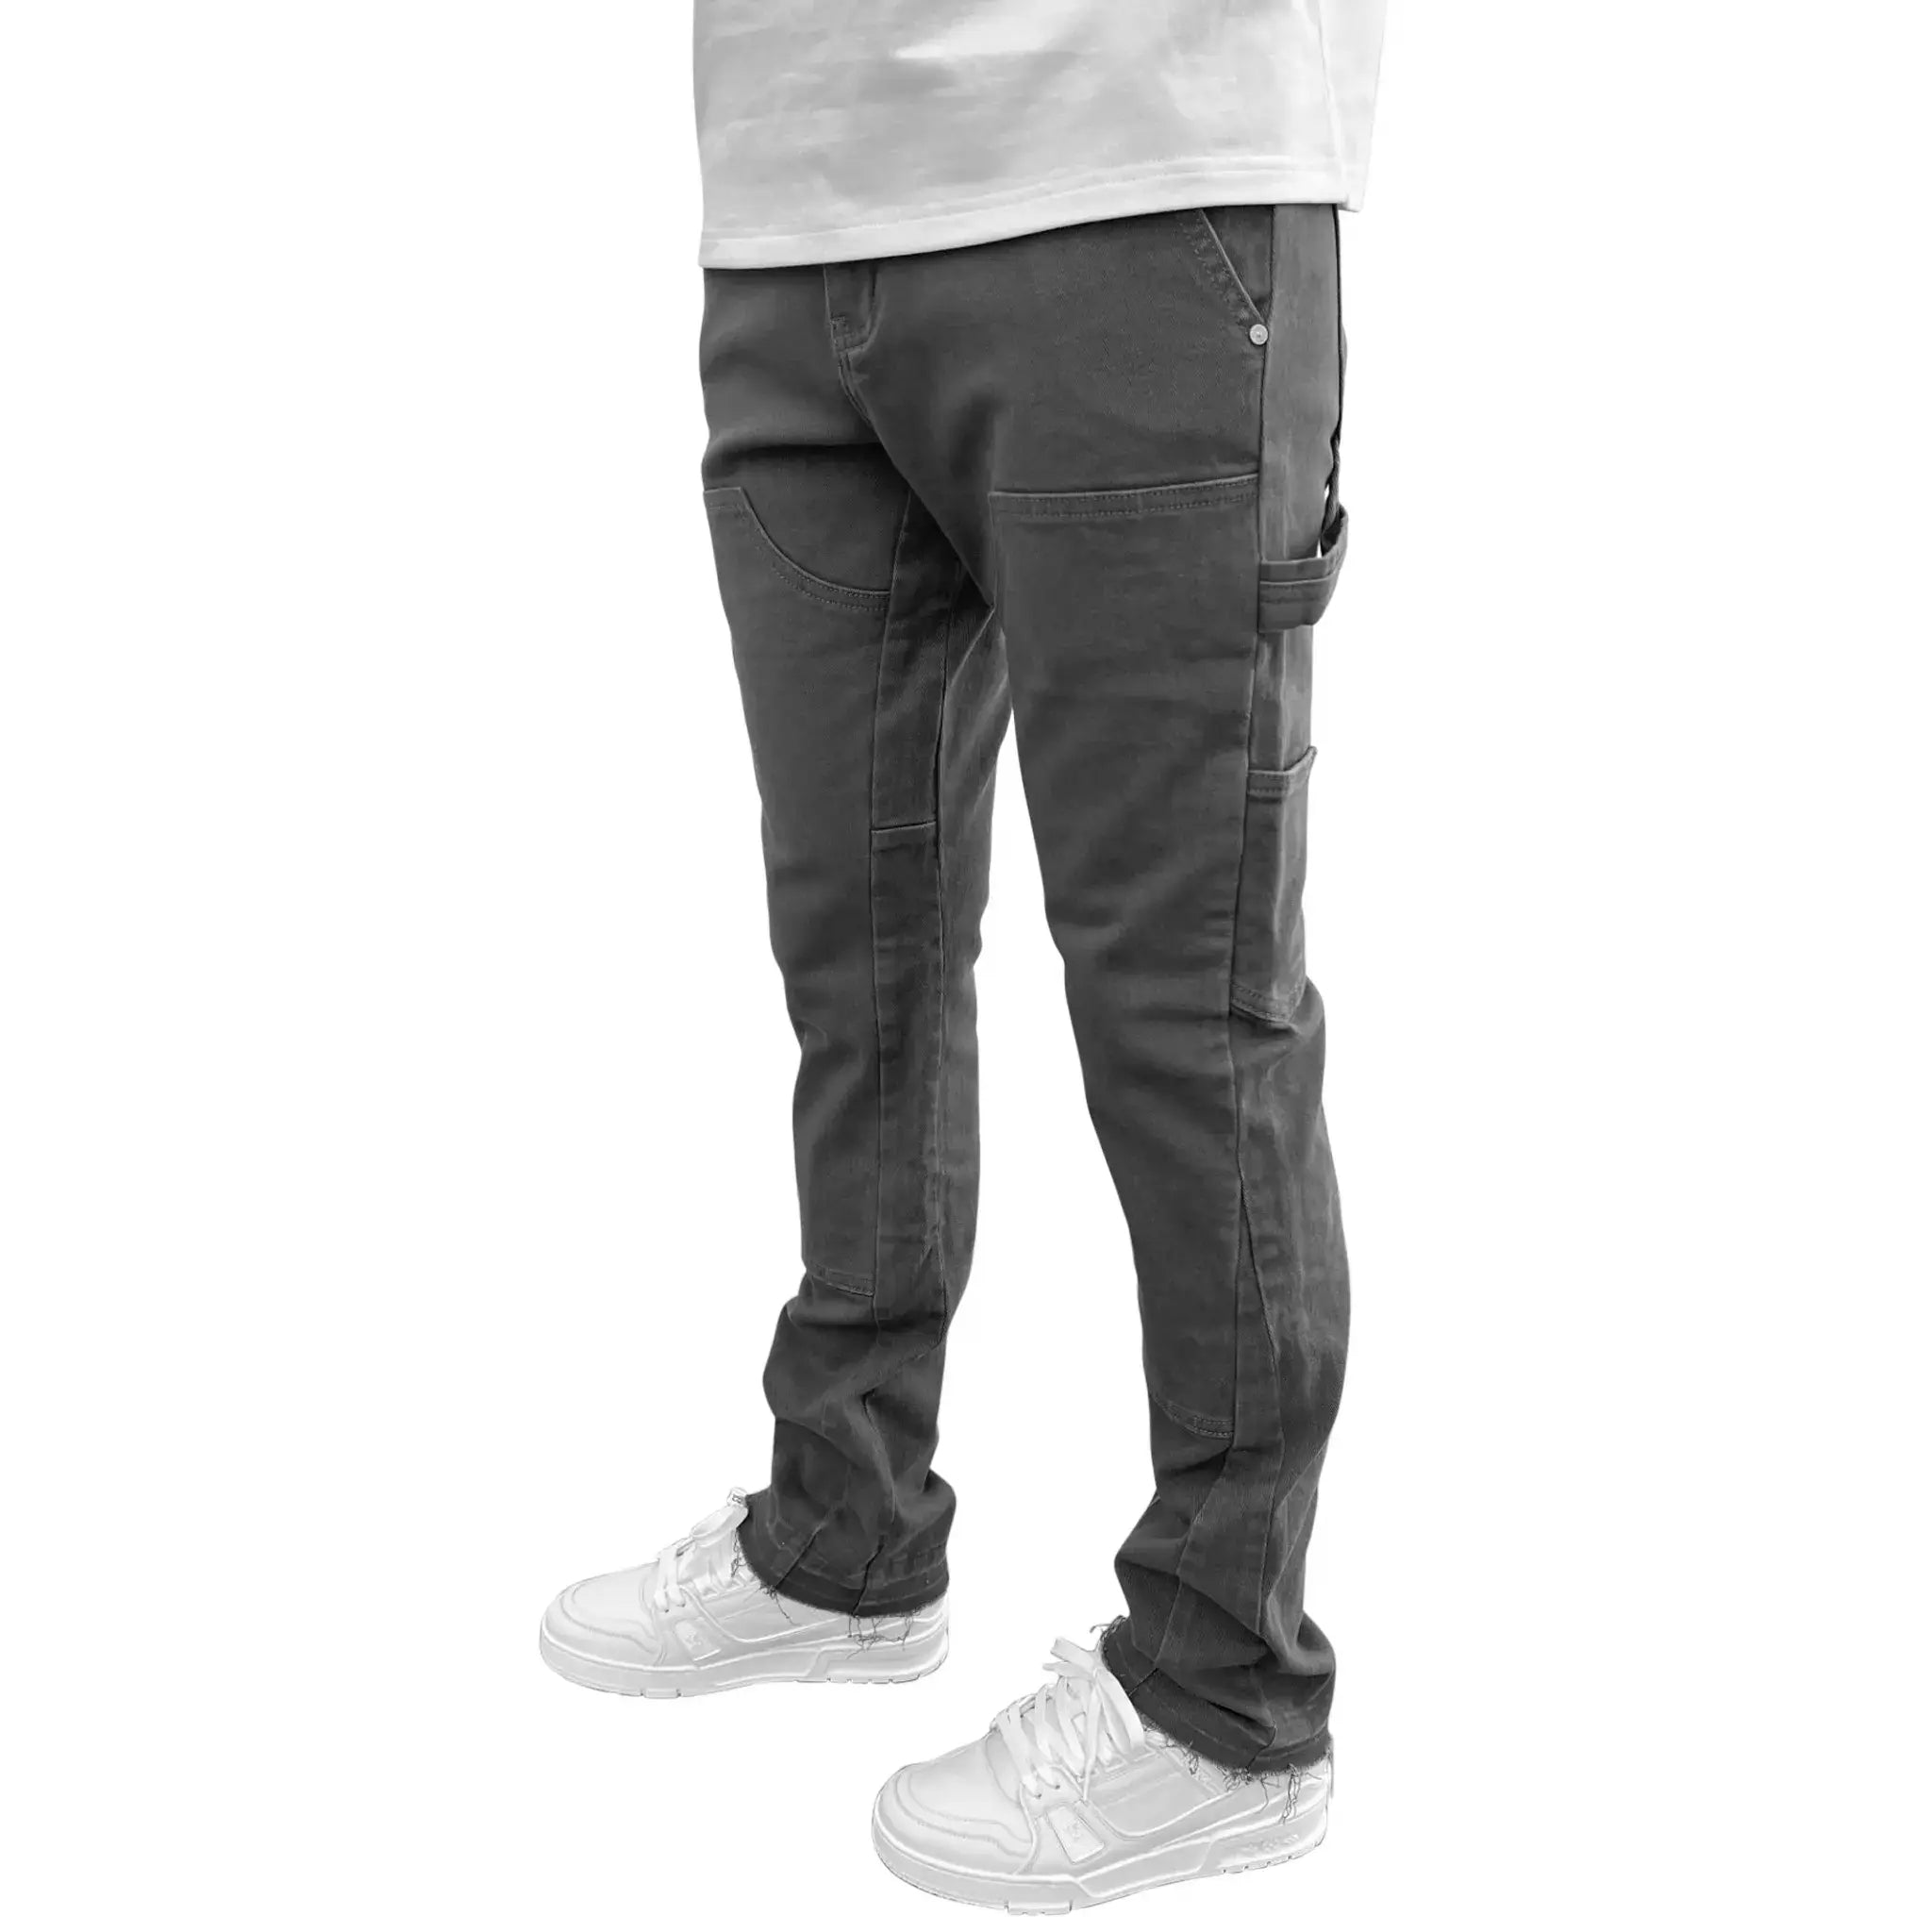 Model Side view of SIARR Rio Jeans Grey